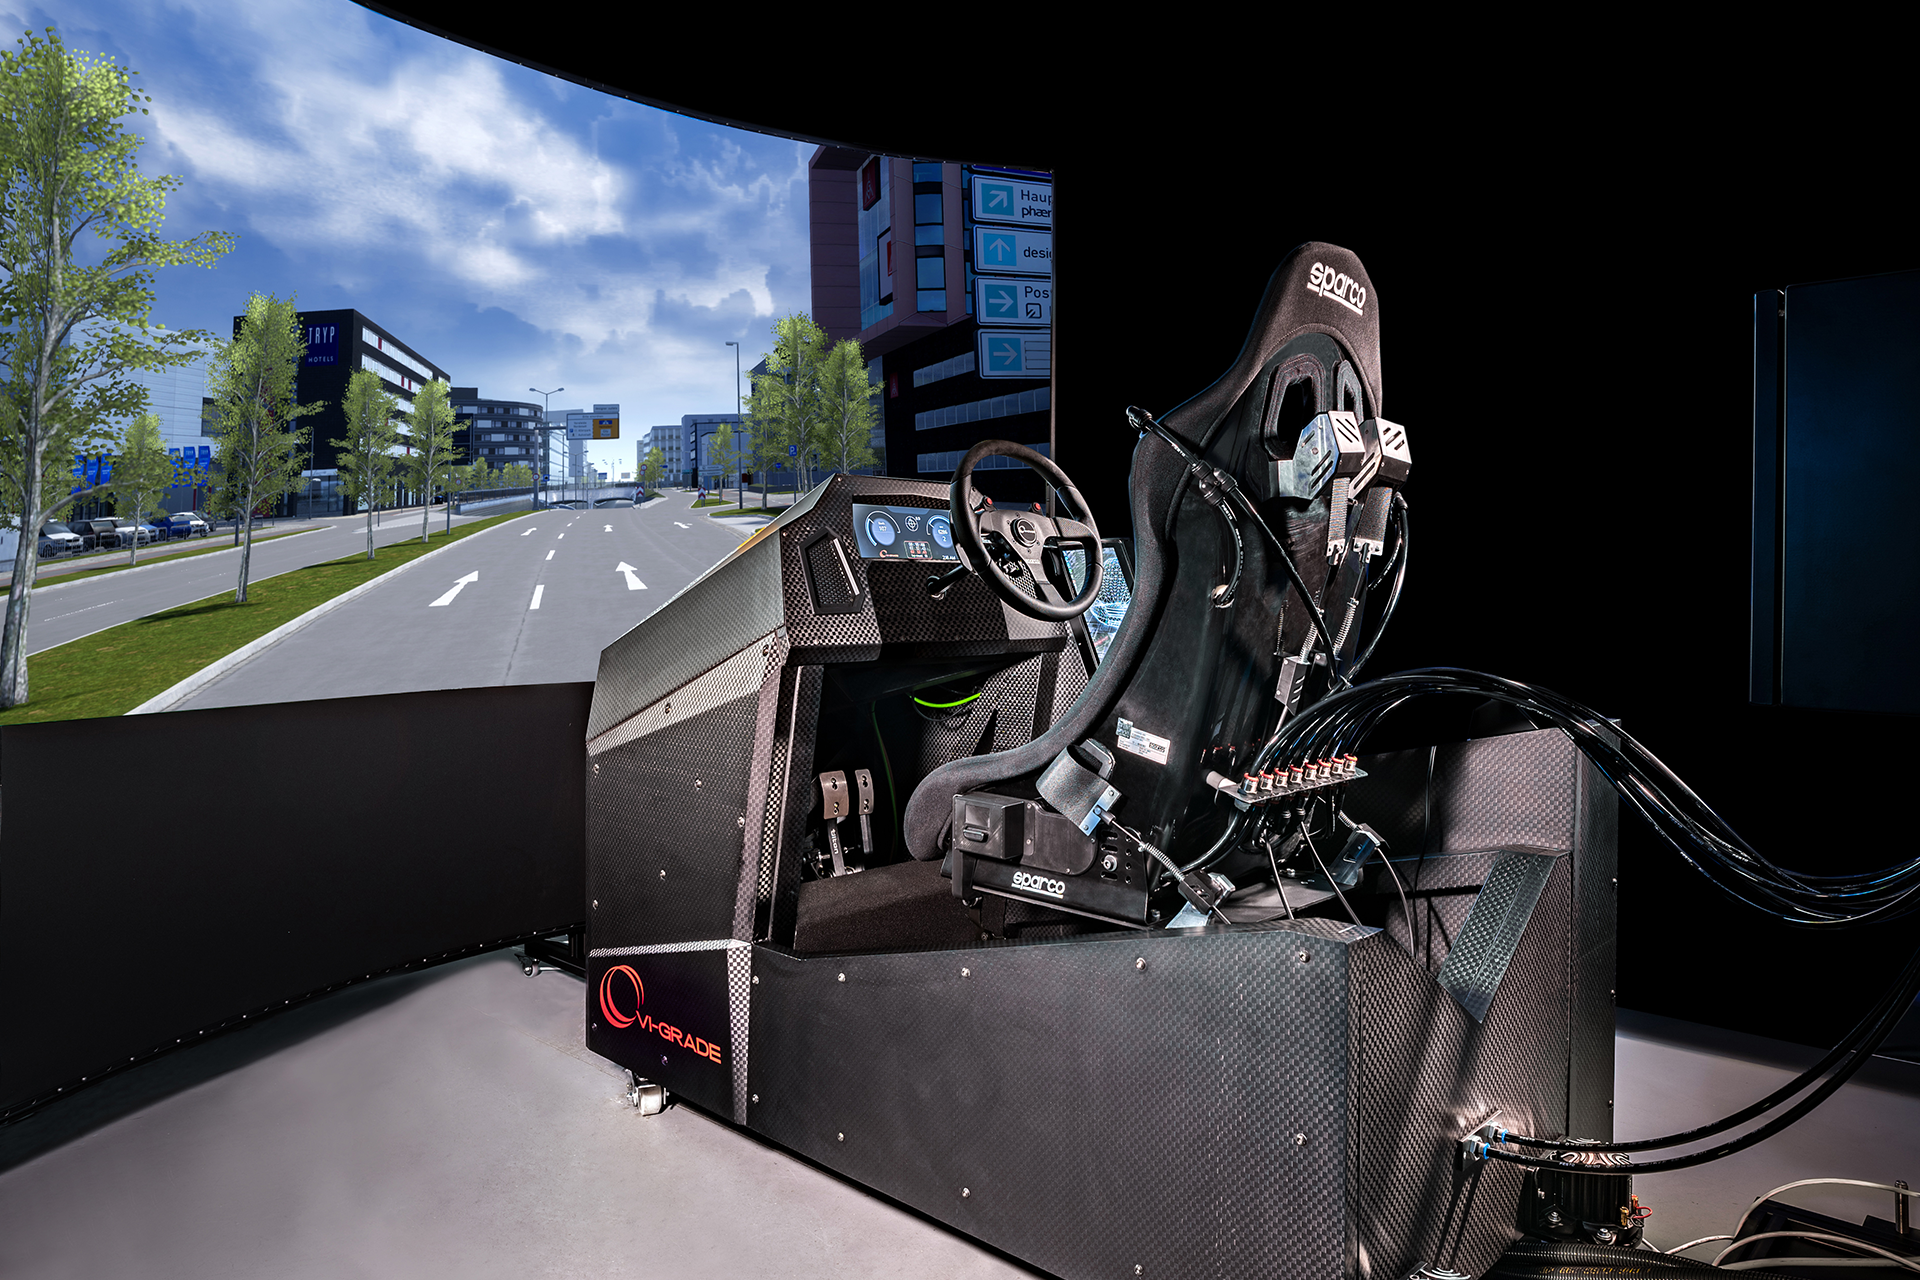 New Trends in Driving Simulators: The out-of-the-loop experience - Virtual  Vehicle